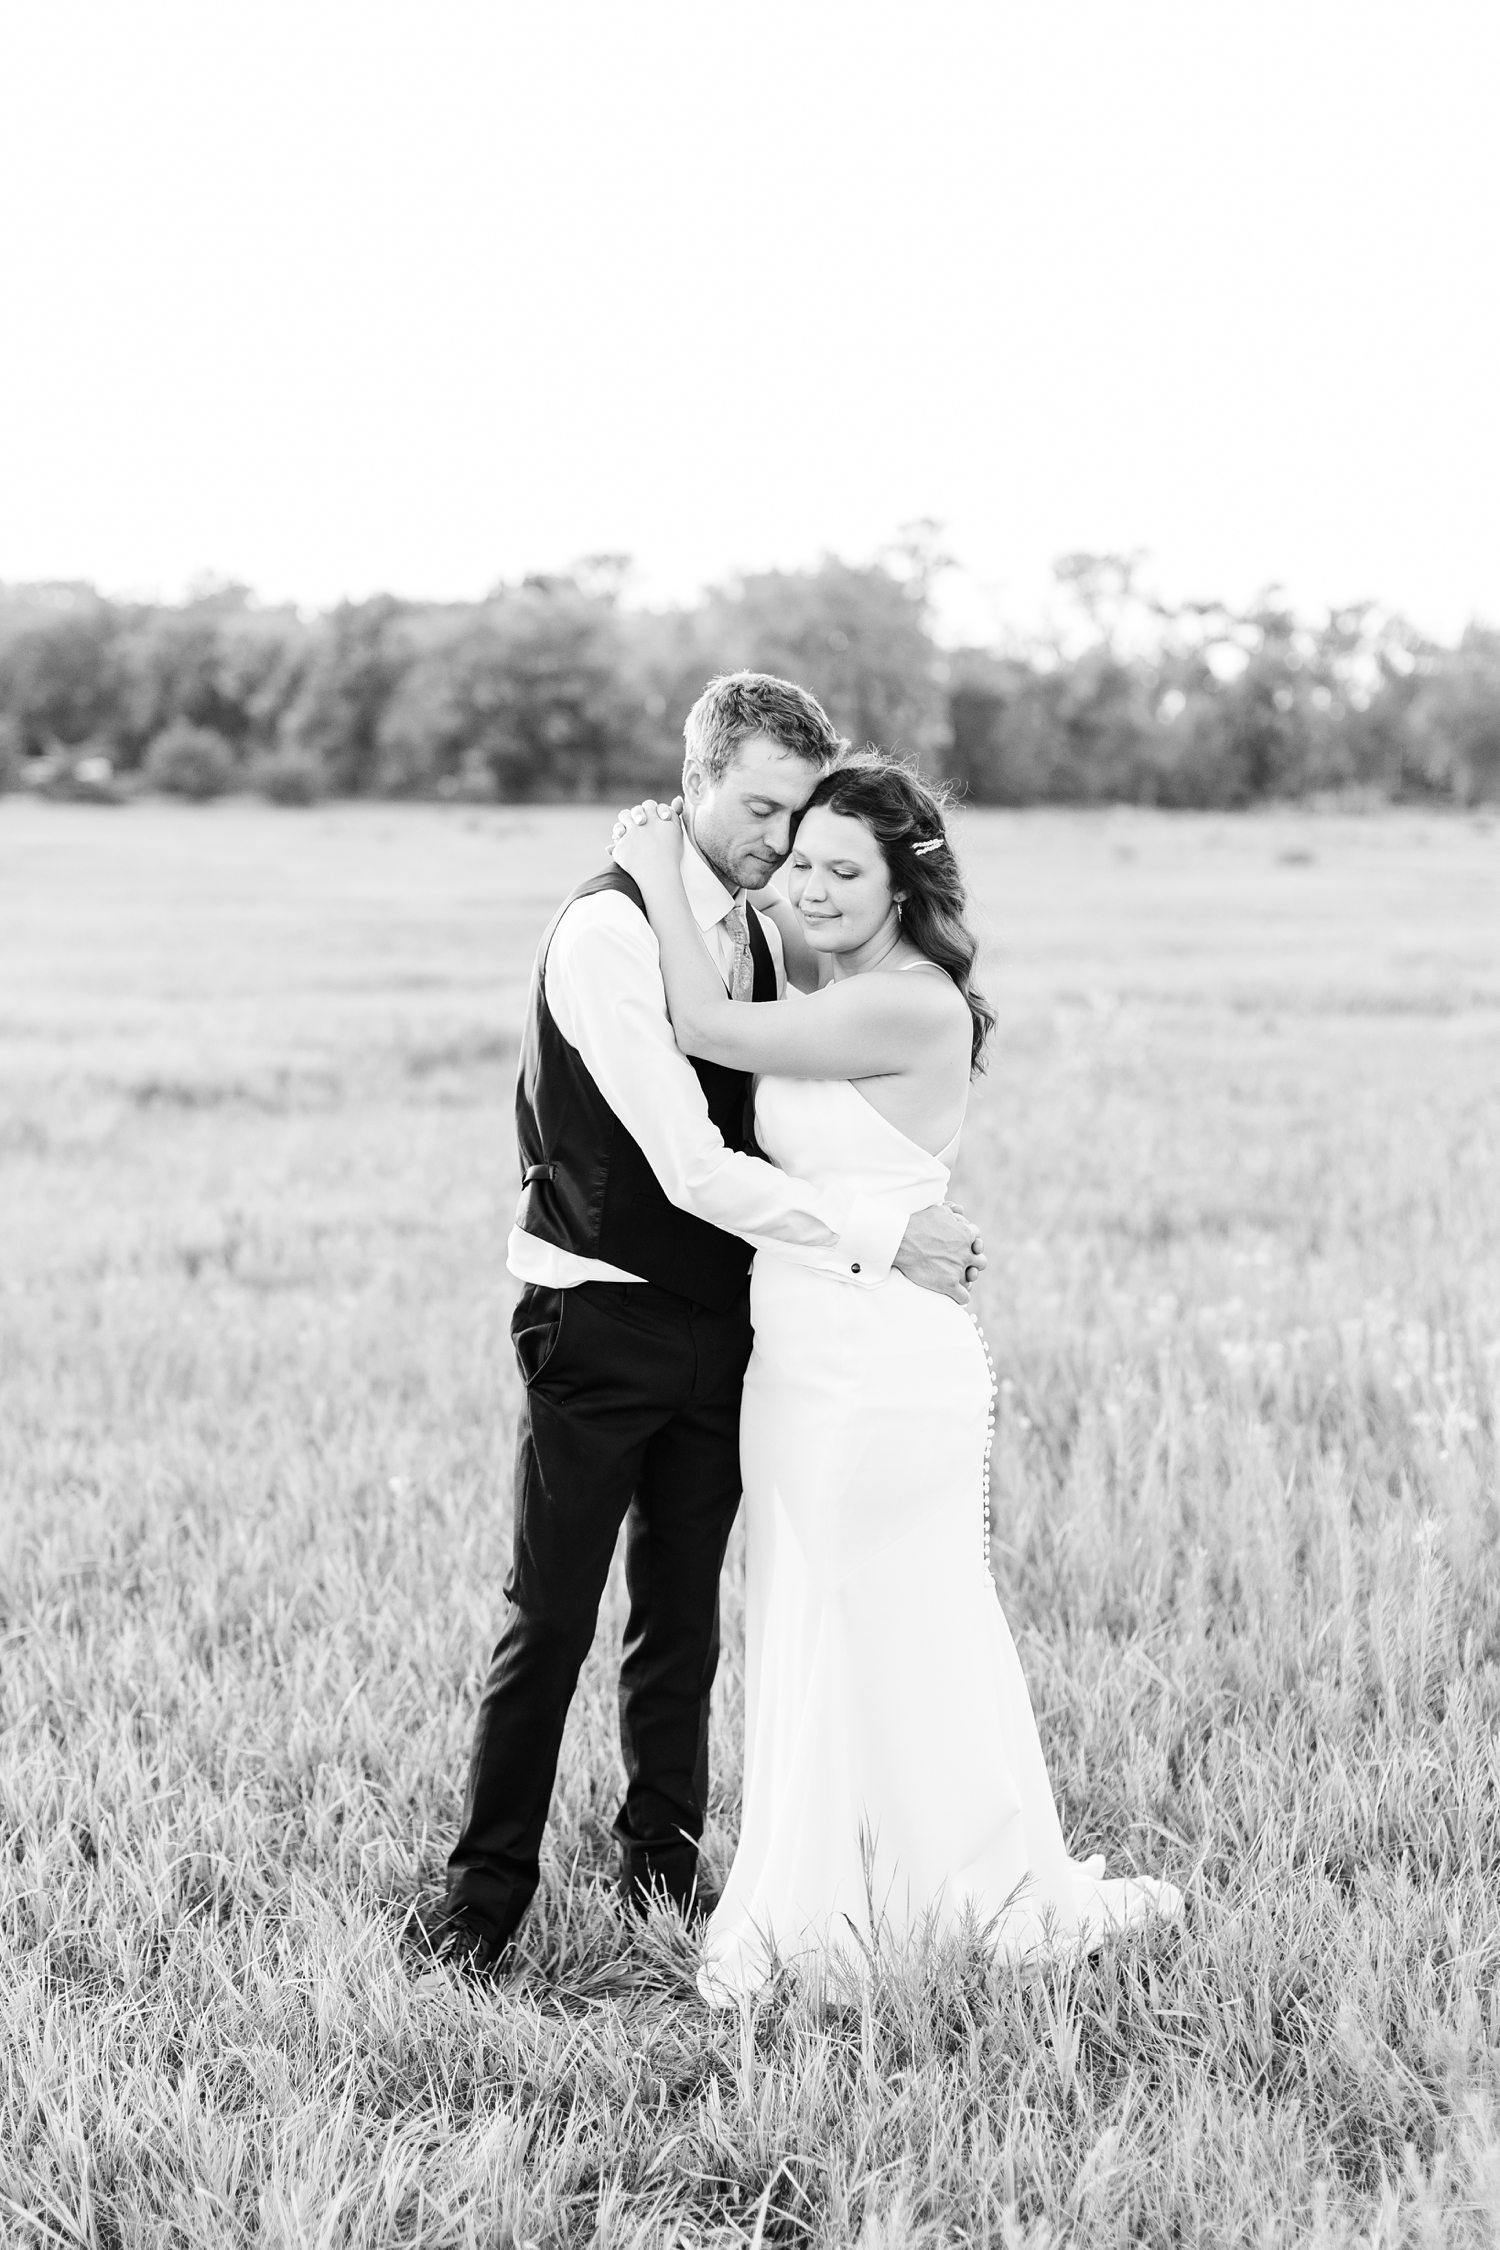 Alyssa and Grant embrace in a grassy pasture at sunset on their wedding day in Emmetsburg, IA | CB Studio